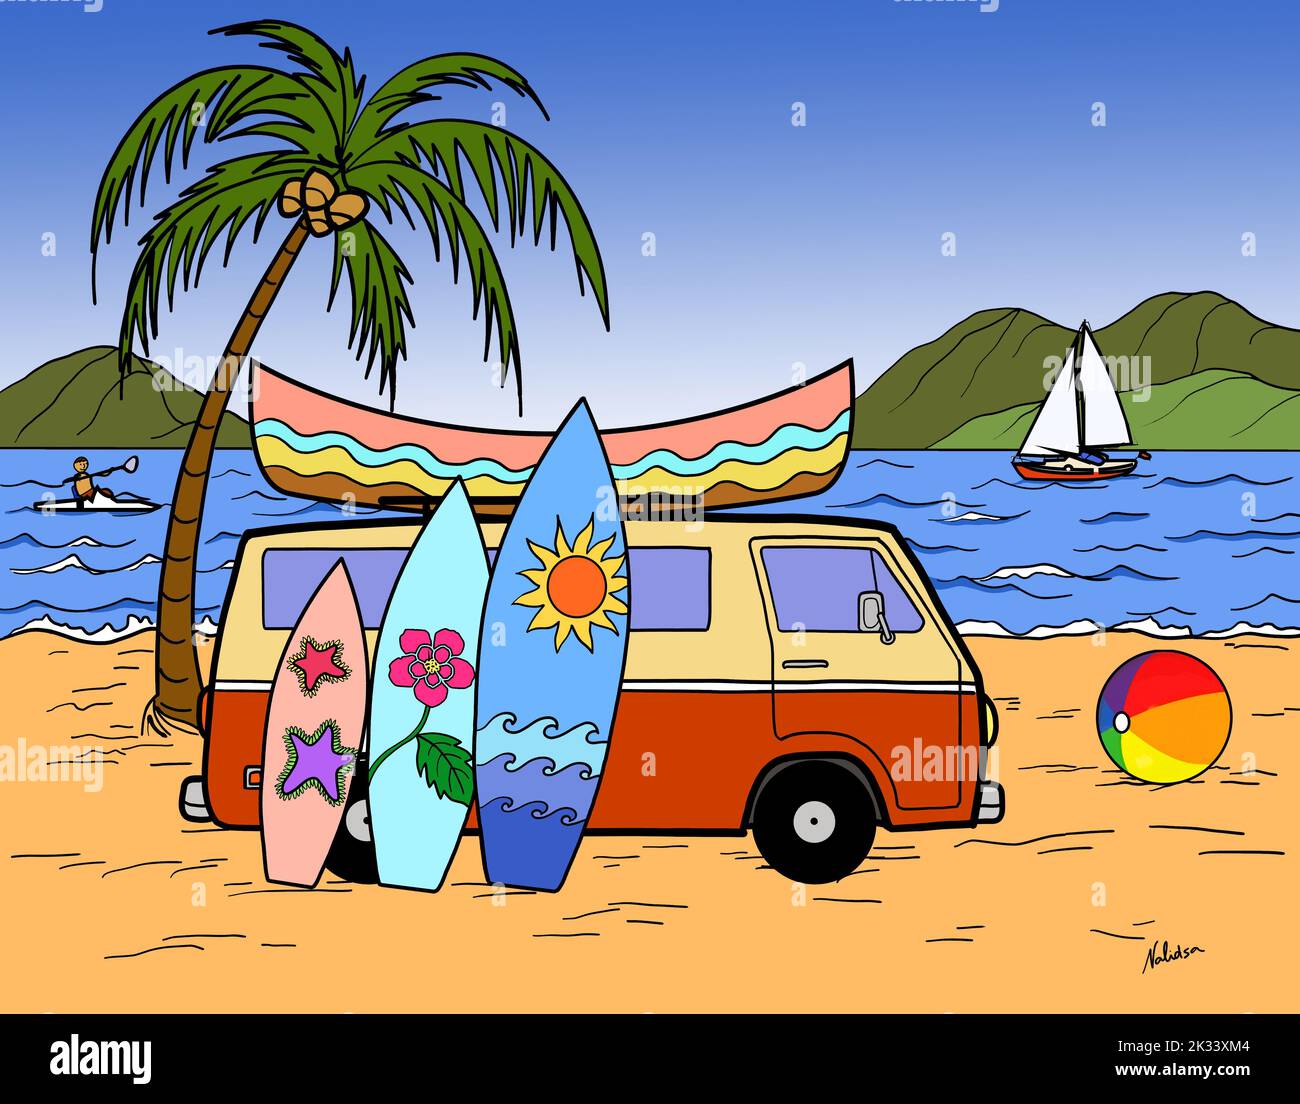 A camper van vehicle with a group of surfboard, a kayak boat and a gay rainbow beach ball on a tropical beach island. Van life, surfing outdoors vacat Stock Photo